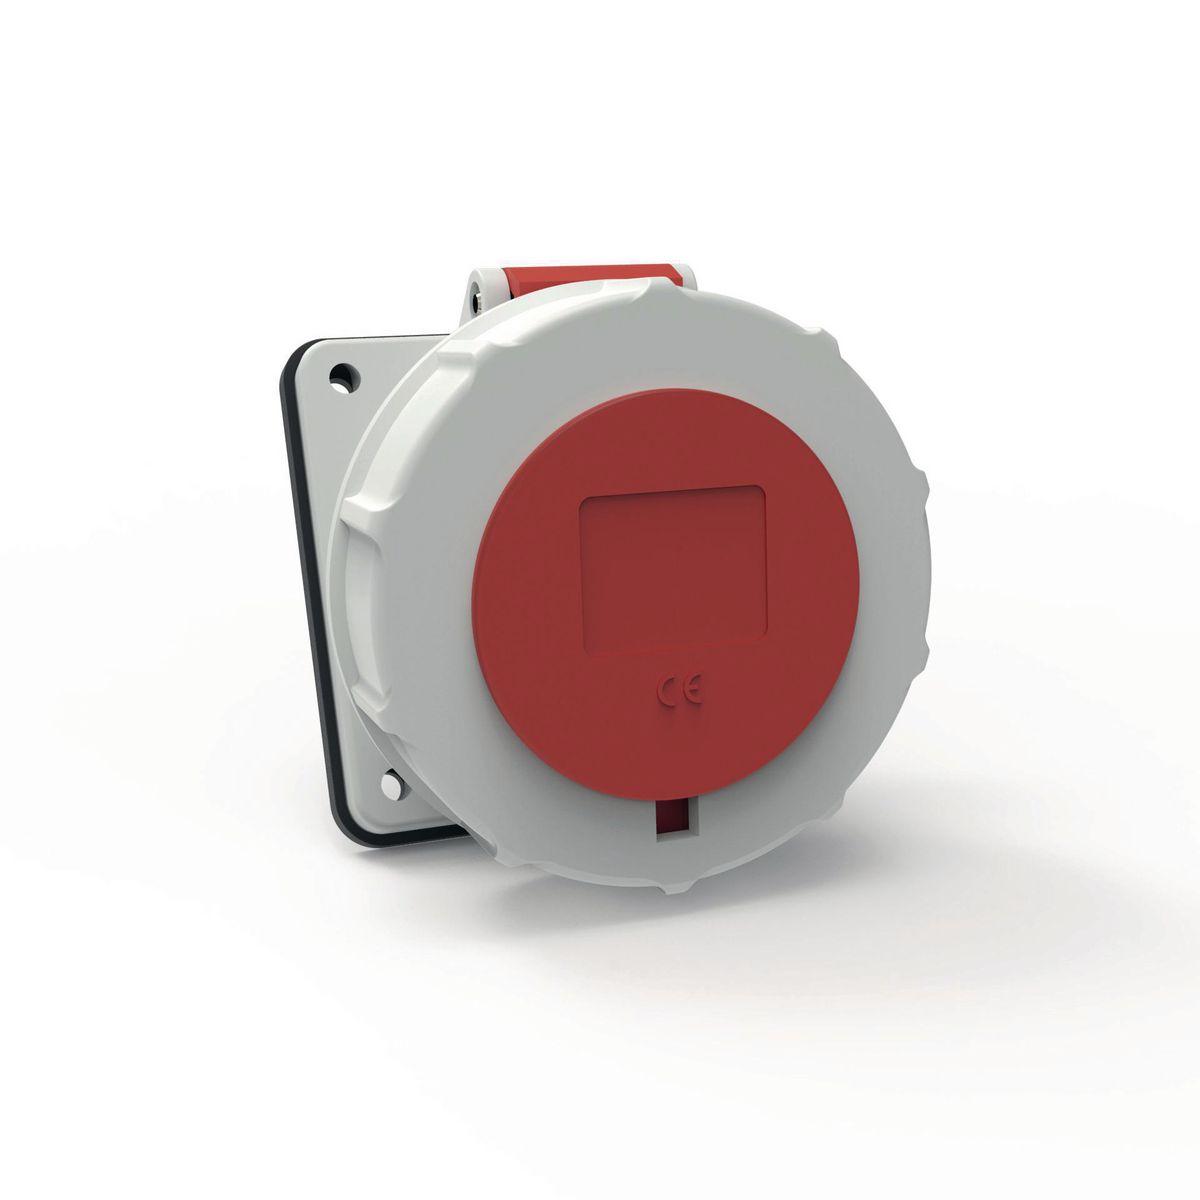 Hubbell C563R6WA Heavy Duty Products, IEC Pin and Sleeve Devices, Hubbell-PRO, Female, Receptacle, 63 A  200-415 VAC, 4-POLE 5-WIRE, Red, Watertight  ; IP67 environmental ratings ; Impact and corrosion resistant insulated non-metallic housing ; Sequential contact engageme